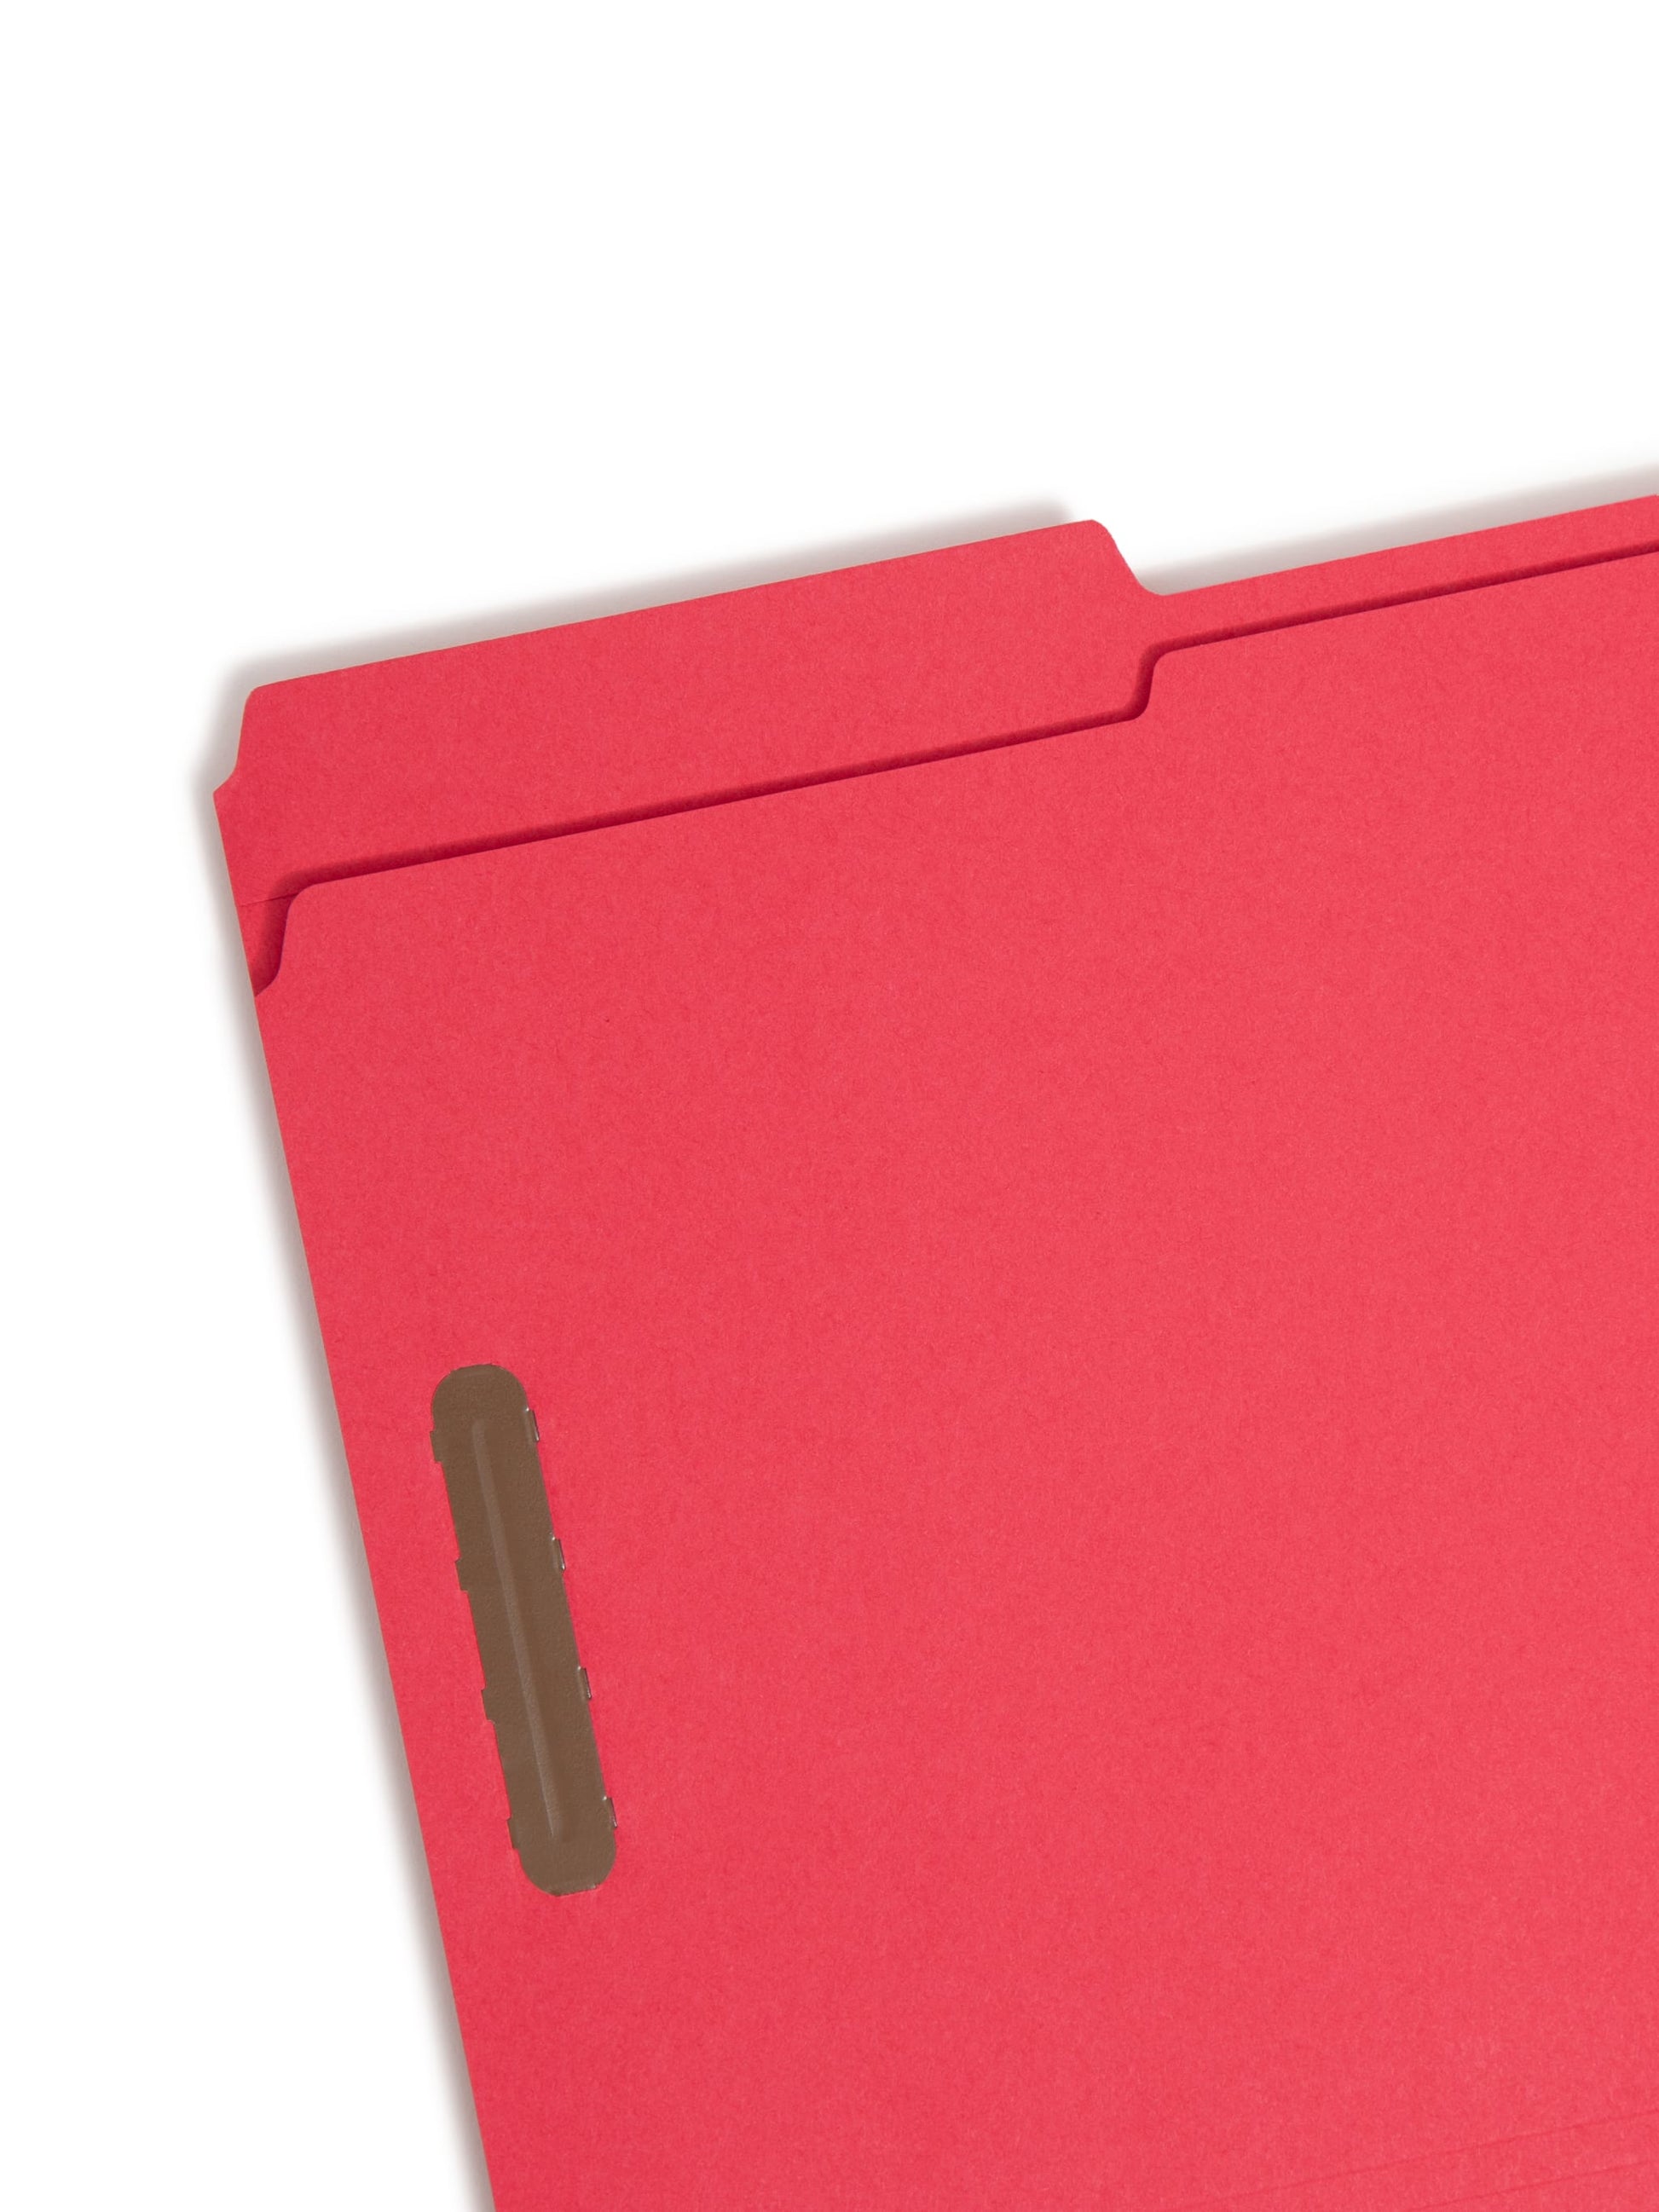 Reinforced Tab Fastener File Folders, 1/3-Cut Tab, 2 Fasteners, Red Color, Legal Size, Set of 50, 086486177405